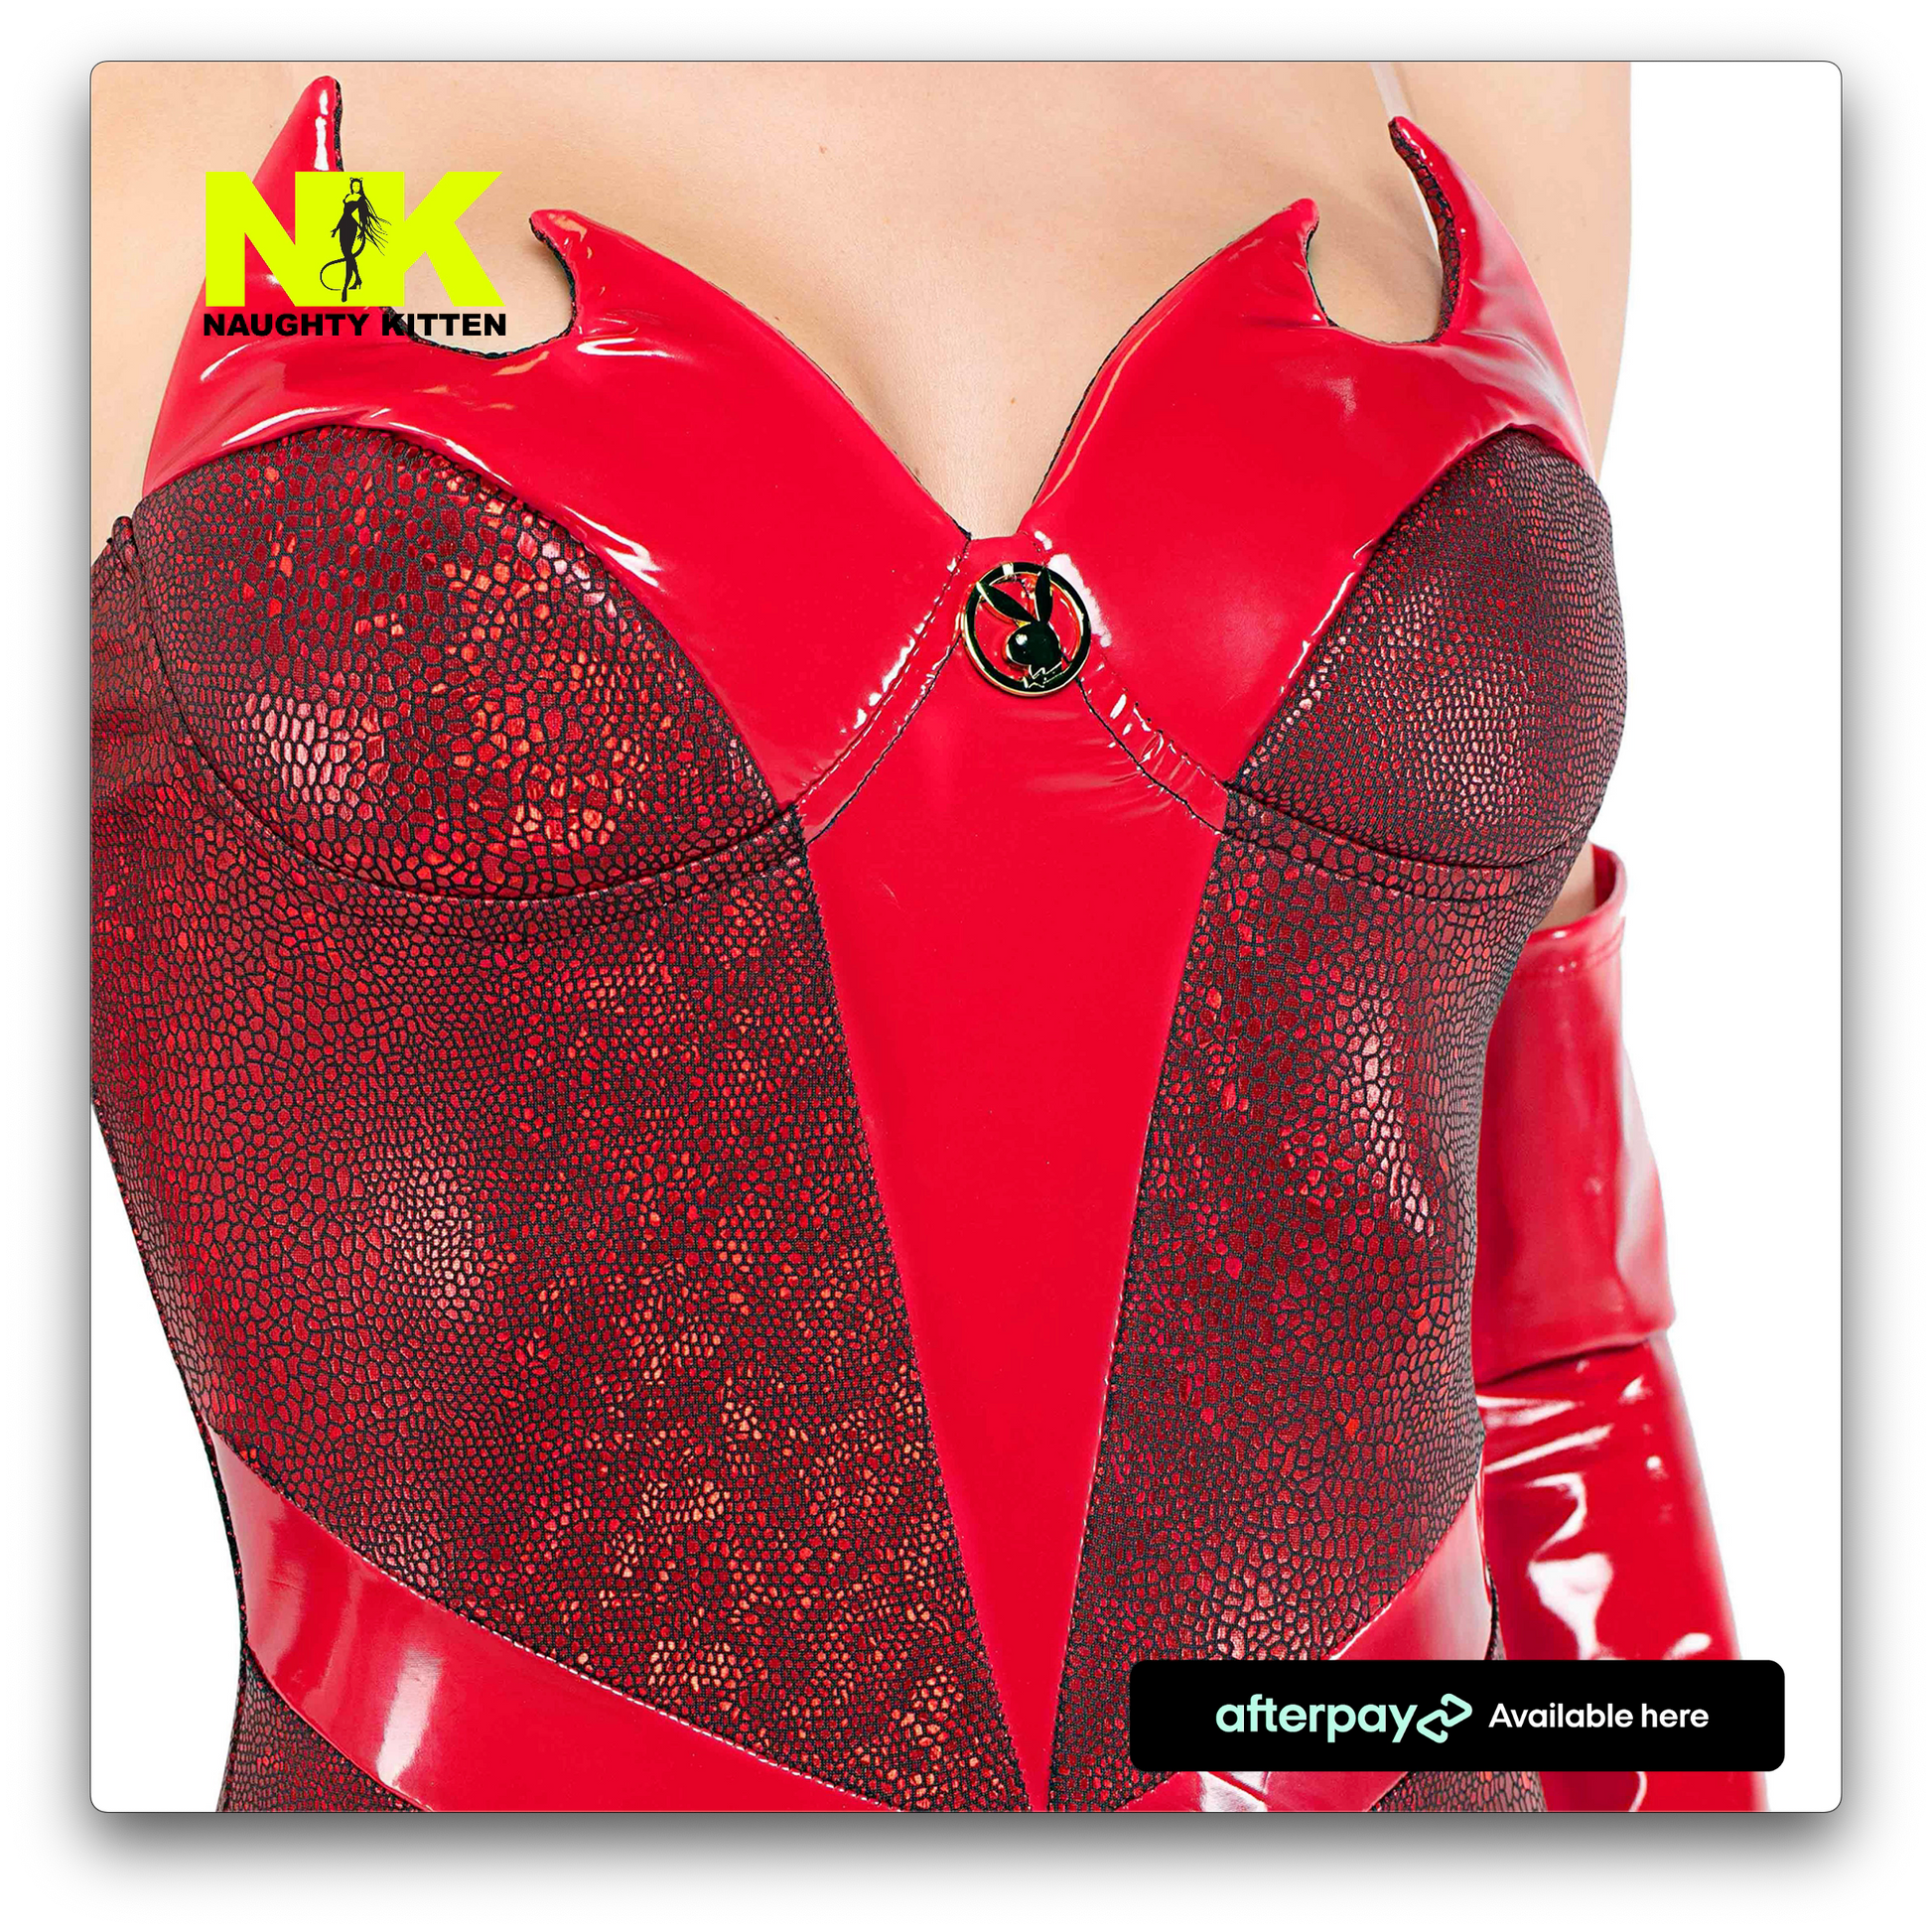 Naughty Kitten Clothing 3pc Playboy Devilicious Front View Playboy Costume